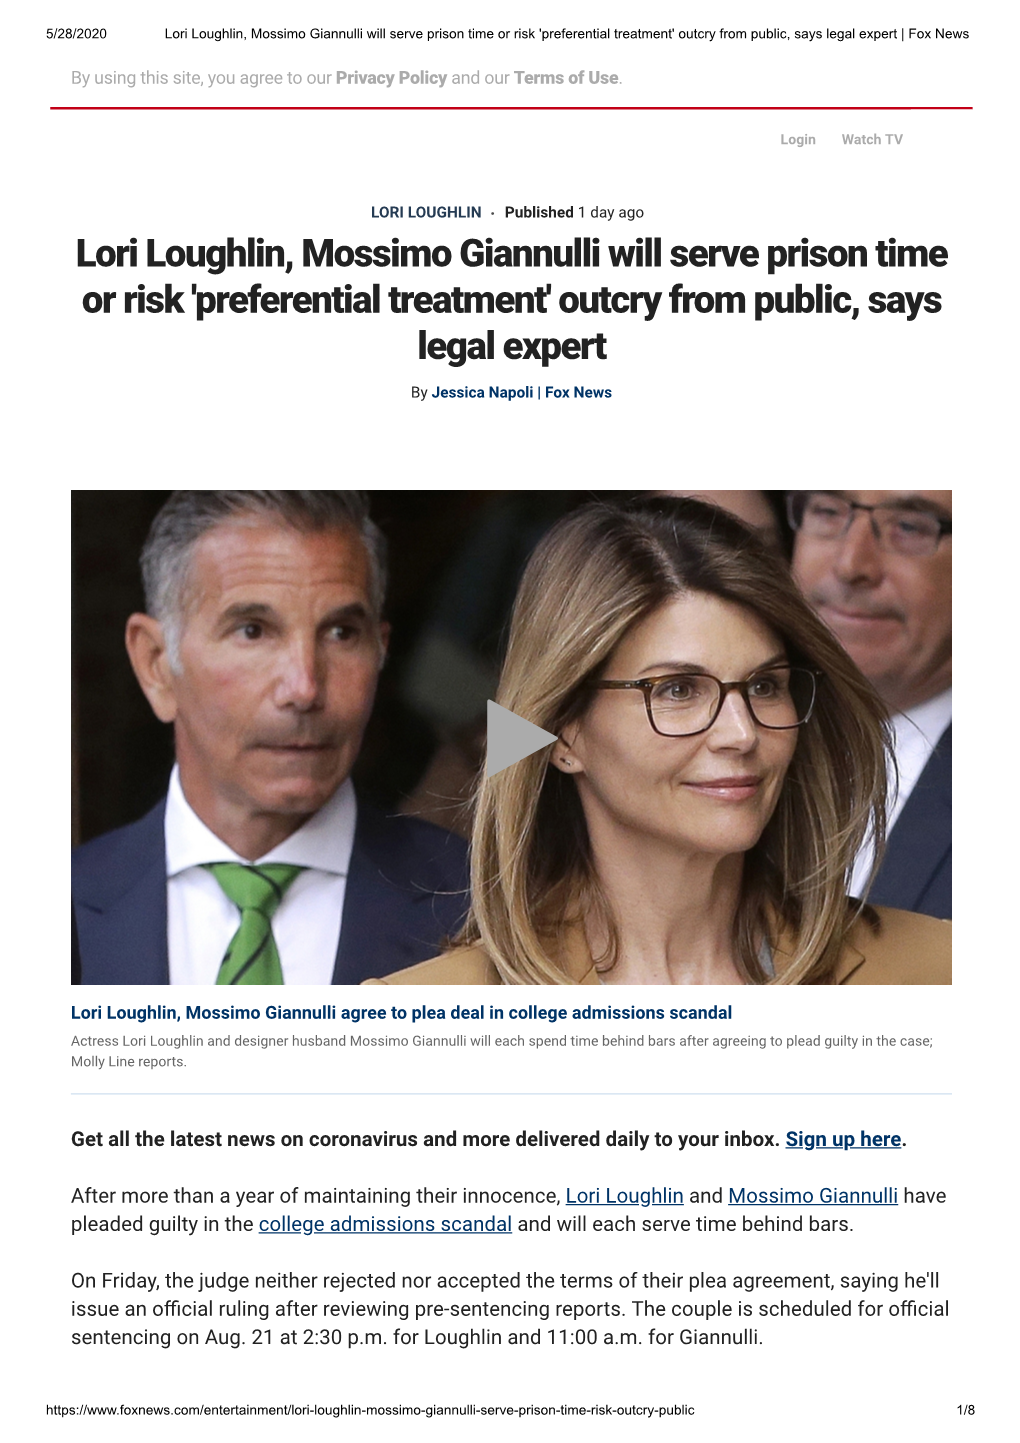 Lori Loughlin, Mossimo Giannulli Will Serve Prison Time Or Risk 'Preferential Treatment' Outcry from Public, Says Legal Expert | Fox News